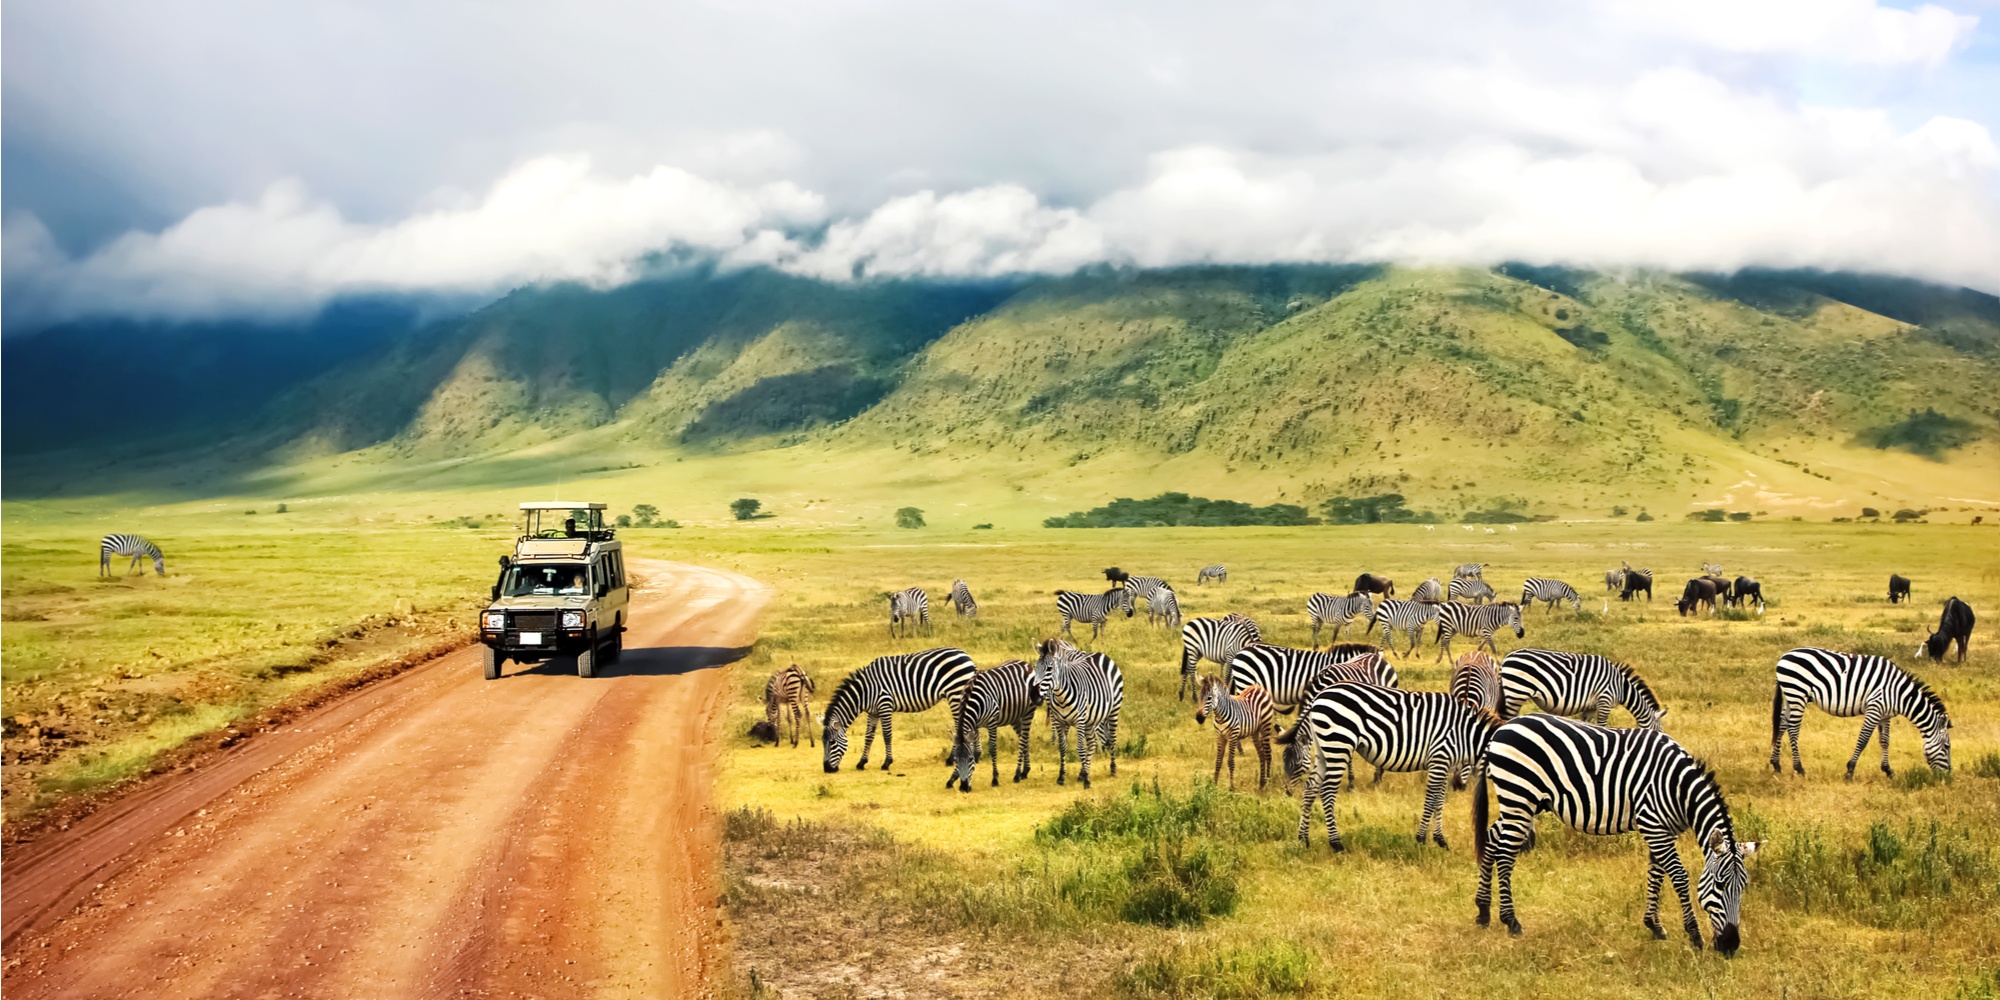 Zebras against mountains and clouds